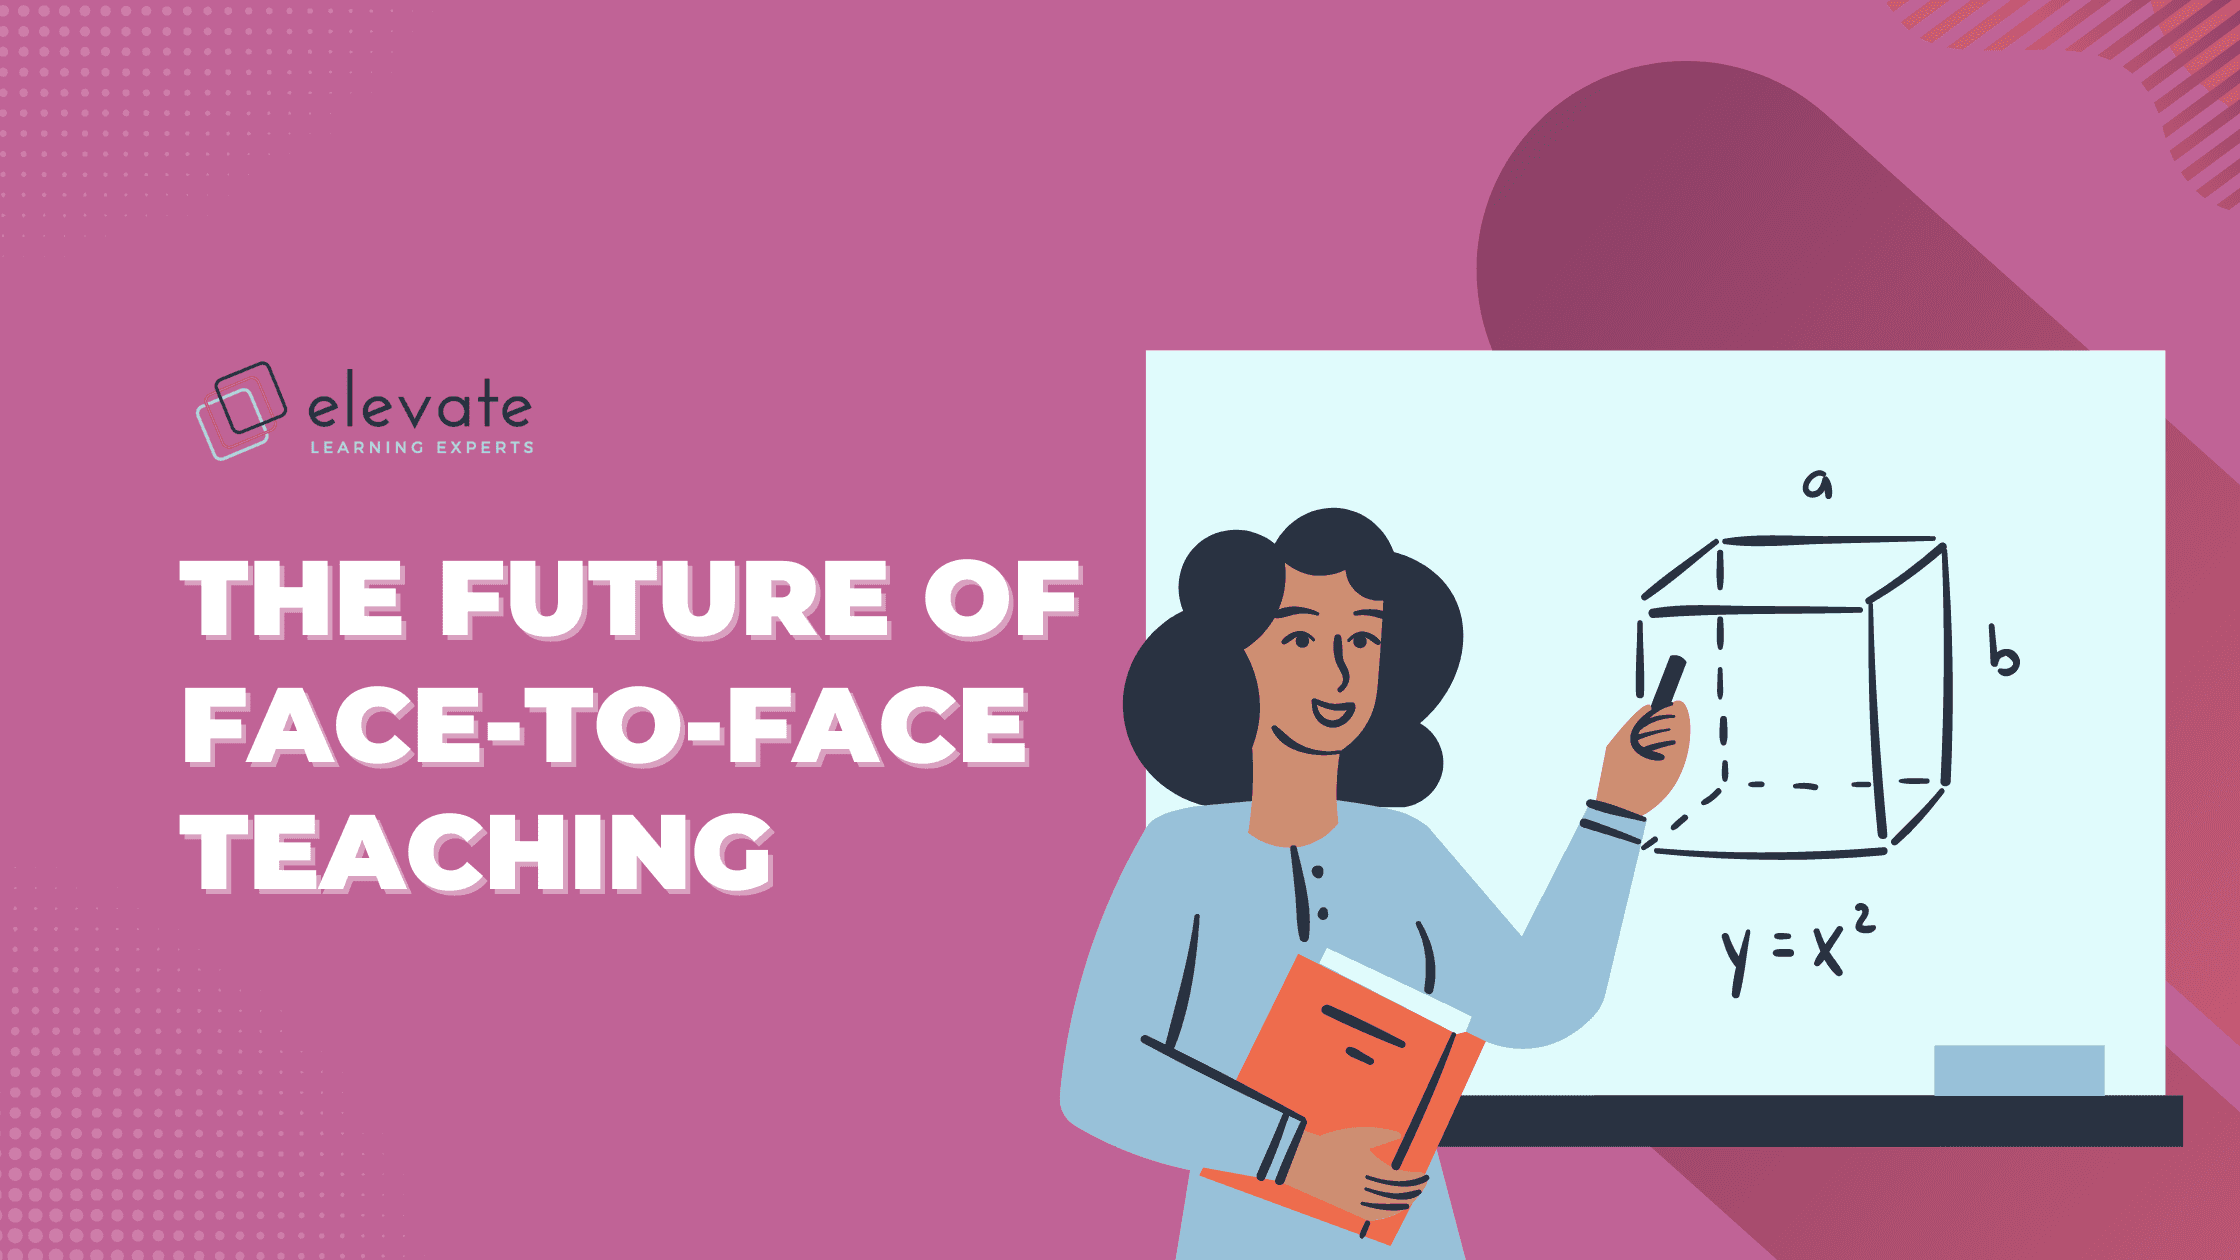 The Future of Face-to-Face Teaching